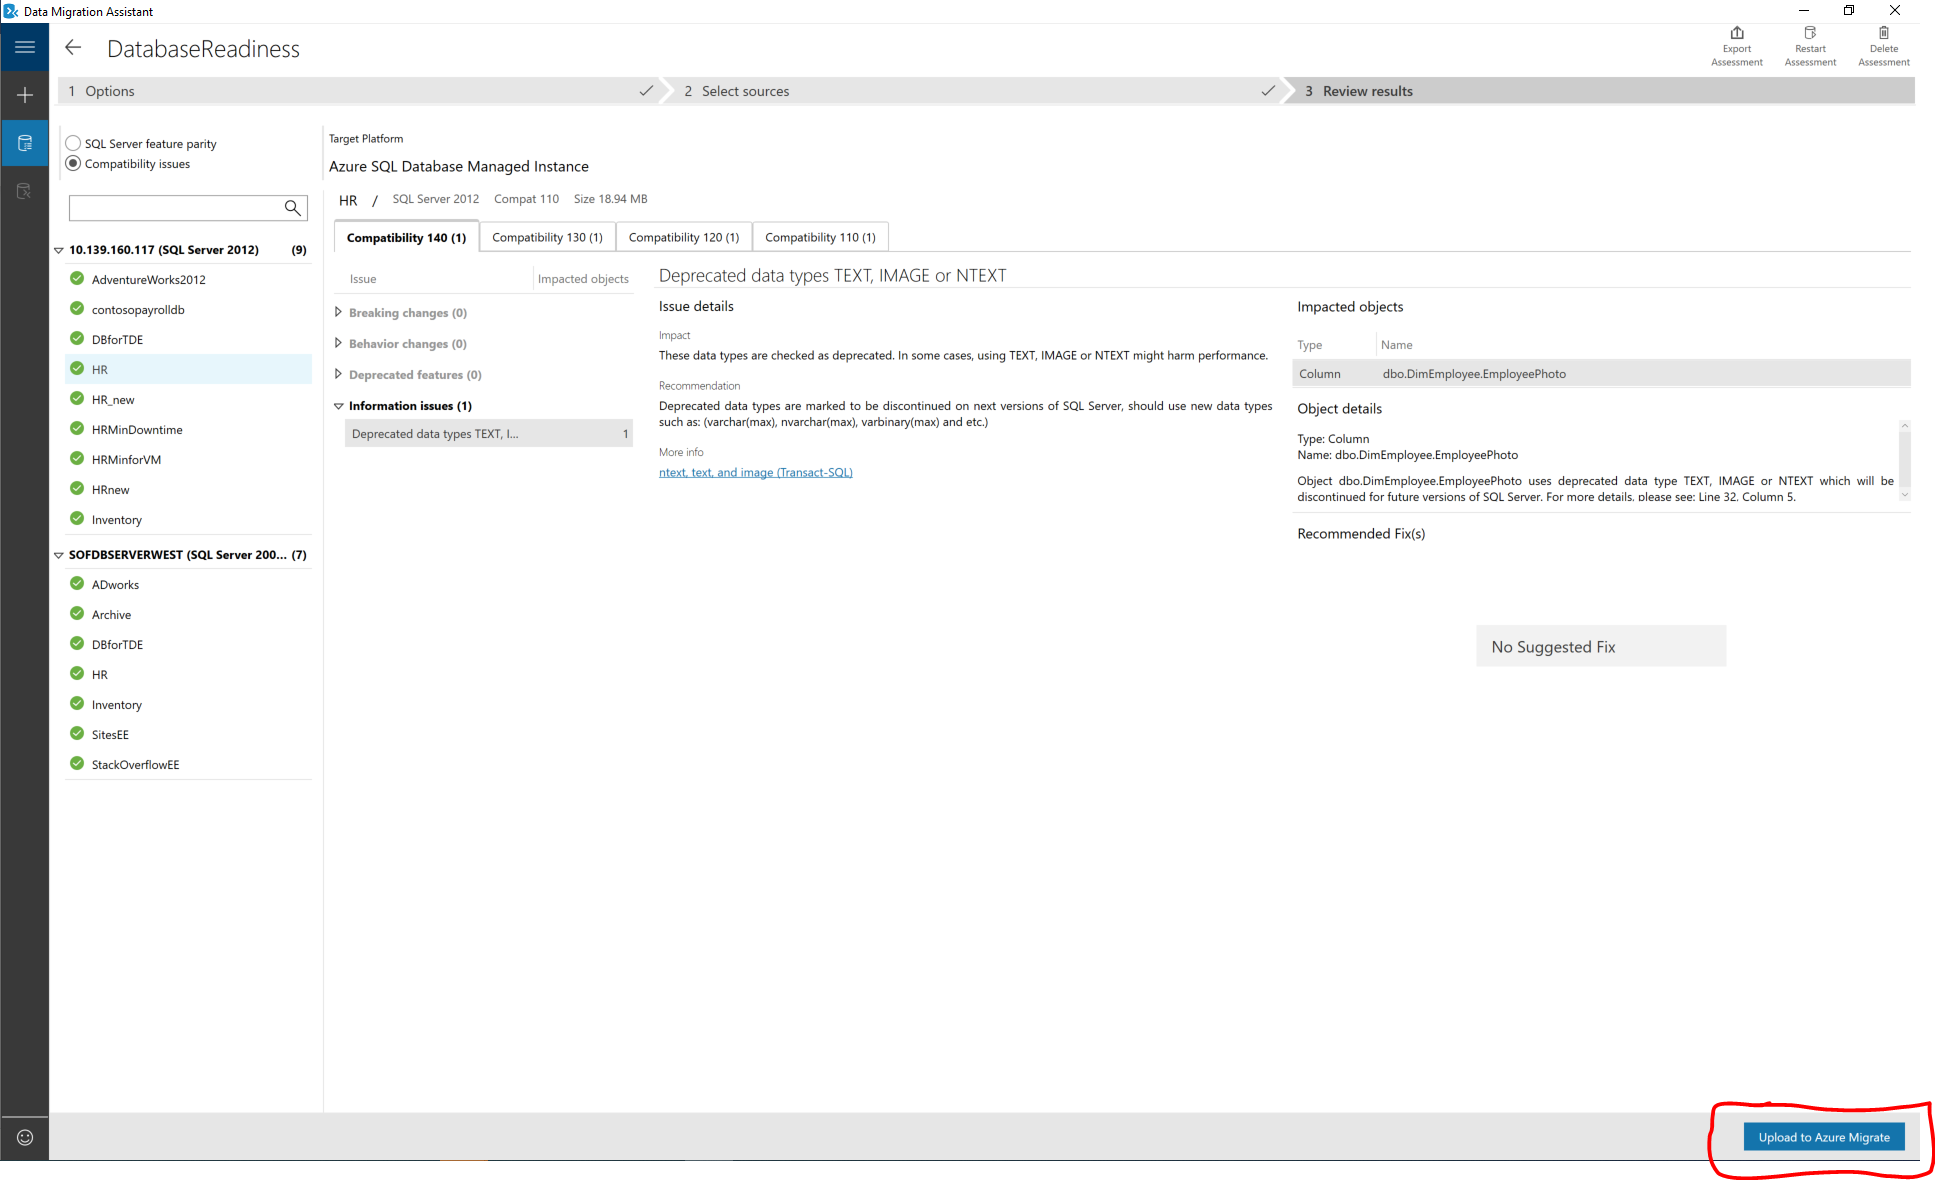 Screenshot showing the Data Migration Assistant with the Upload to Azure Migrate option called out.